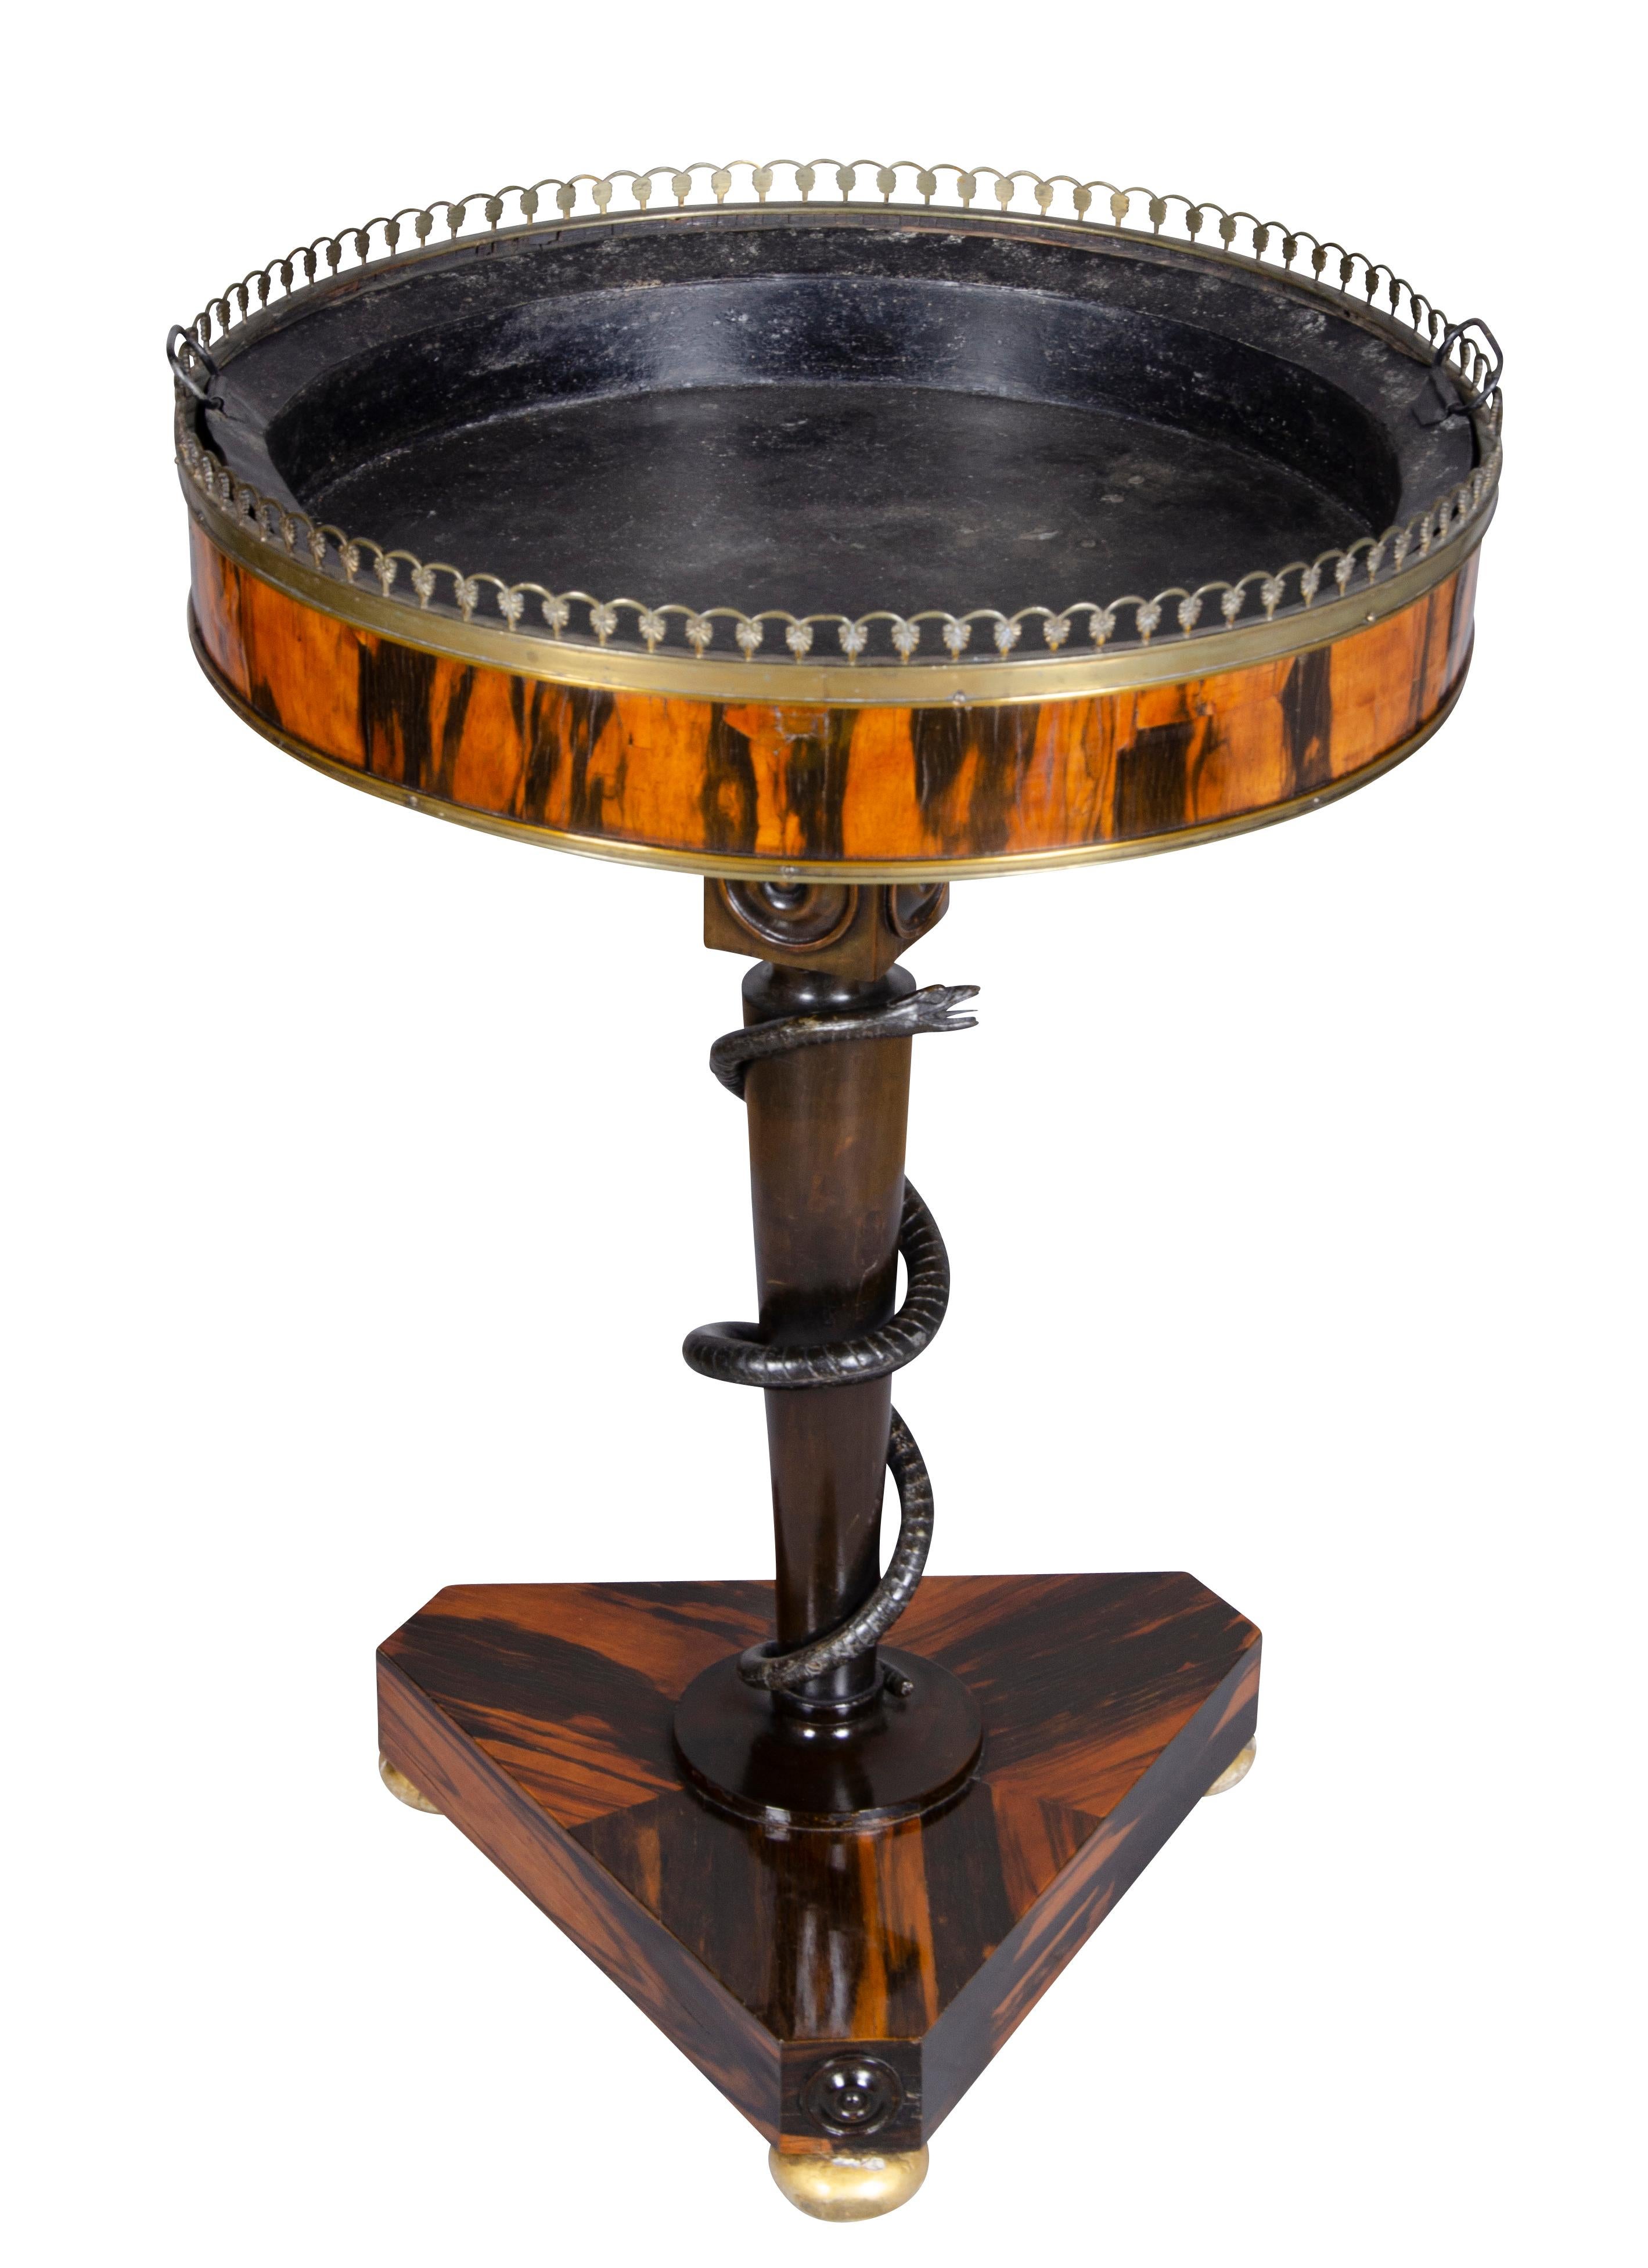 Circular bowl with tin lining and brass border raised on a columnar support with a carved snake wrapped around, tripartite base with gilded bun feet.